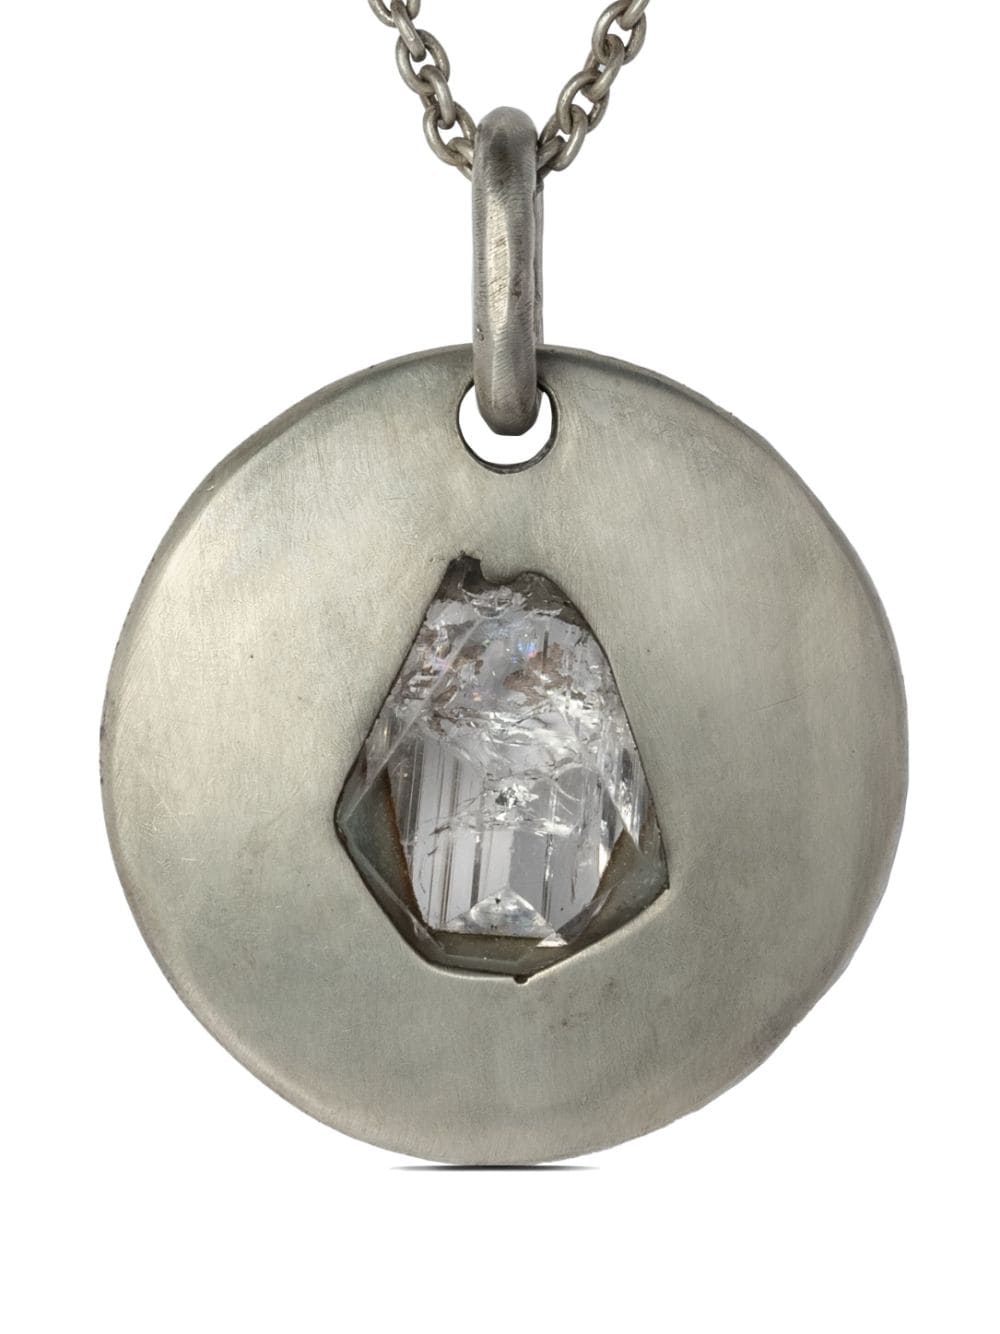 Parts Of Four Disk Danburite Pendant Necklace In Silver